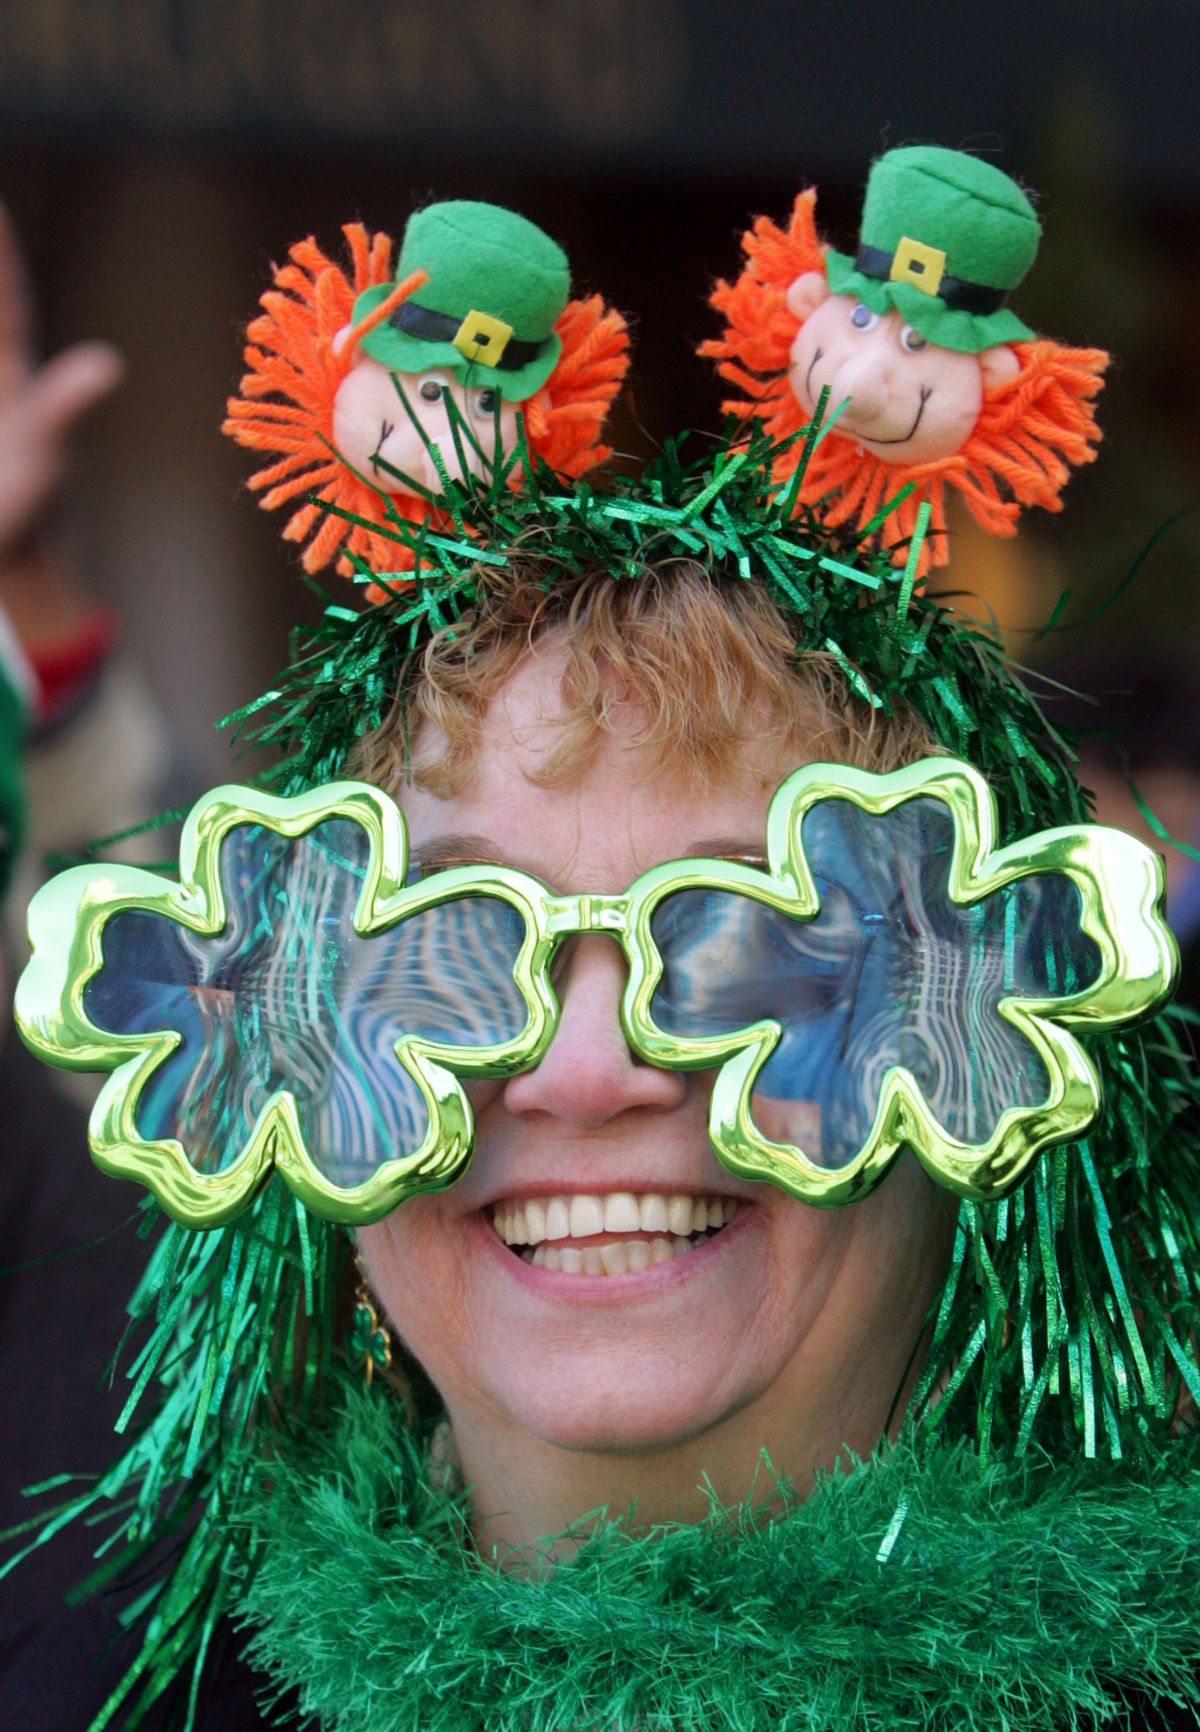 Geralyn Monahan-Jones, from Beacon, NY, greets participants of the annual St. Patrick's Day Parade on Fifth Avenue, Friday, March 17, 2006 in New York. This is the 245th year that St. Patrick's Day Parade has been held in New York City. (AP Photo/Dima Gavrysh) (AP)